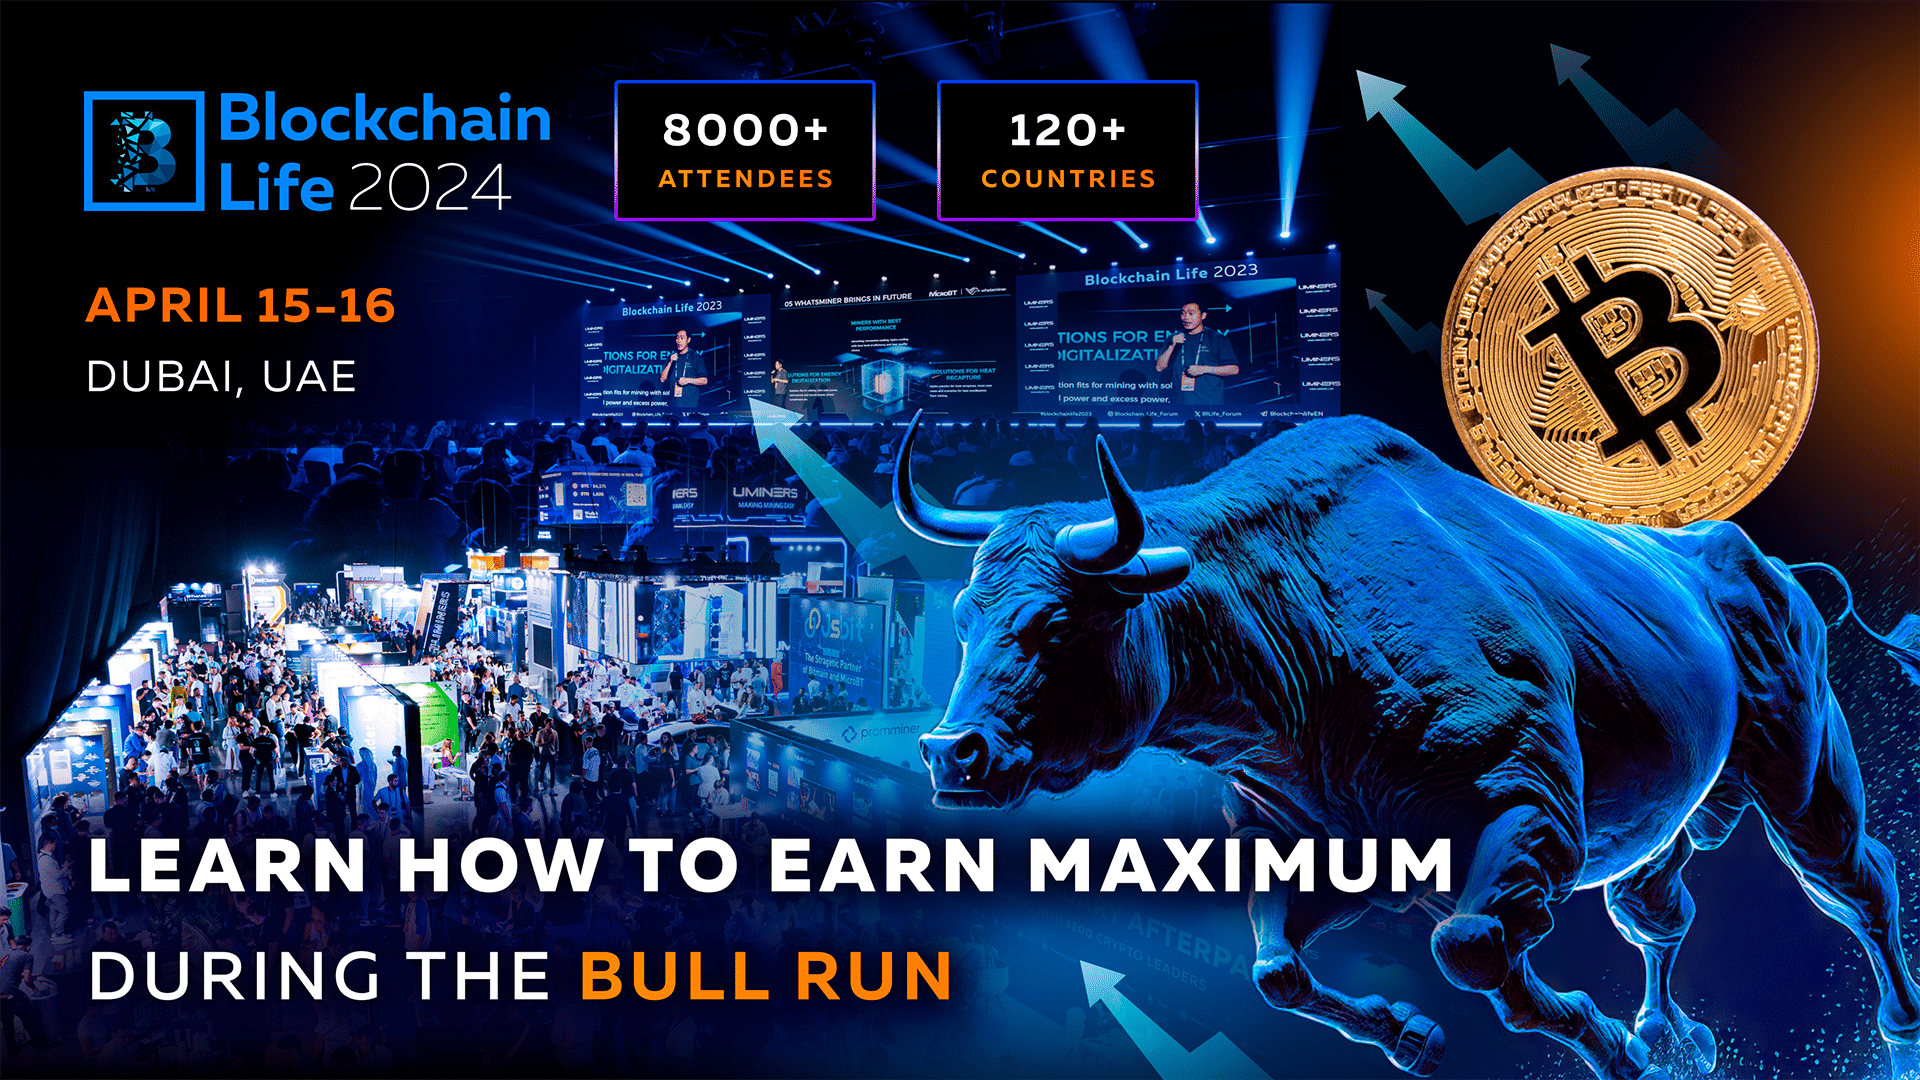 Blockchain life arena expanded as more attendees are keen on Bull Run gains